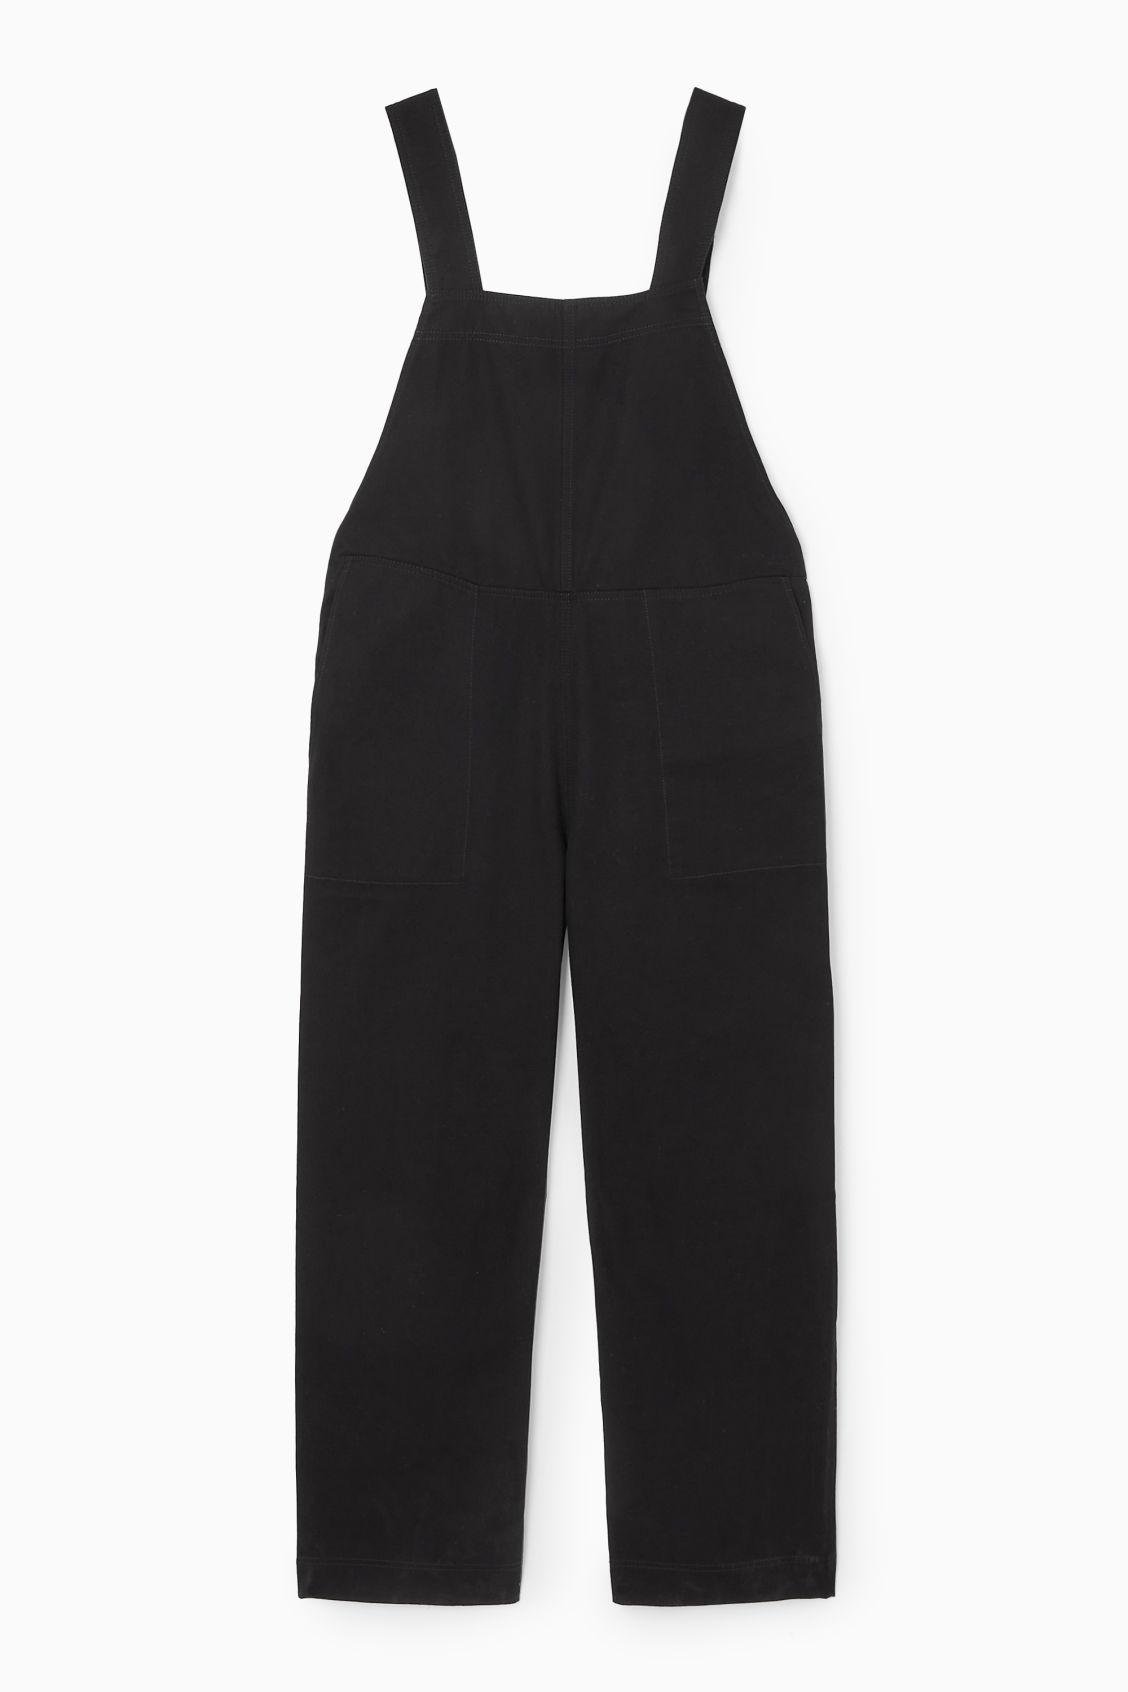 COS - The all-in-one. Our wide-leg dungarees are crafted